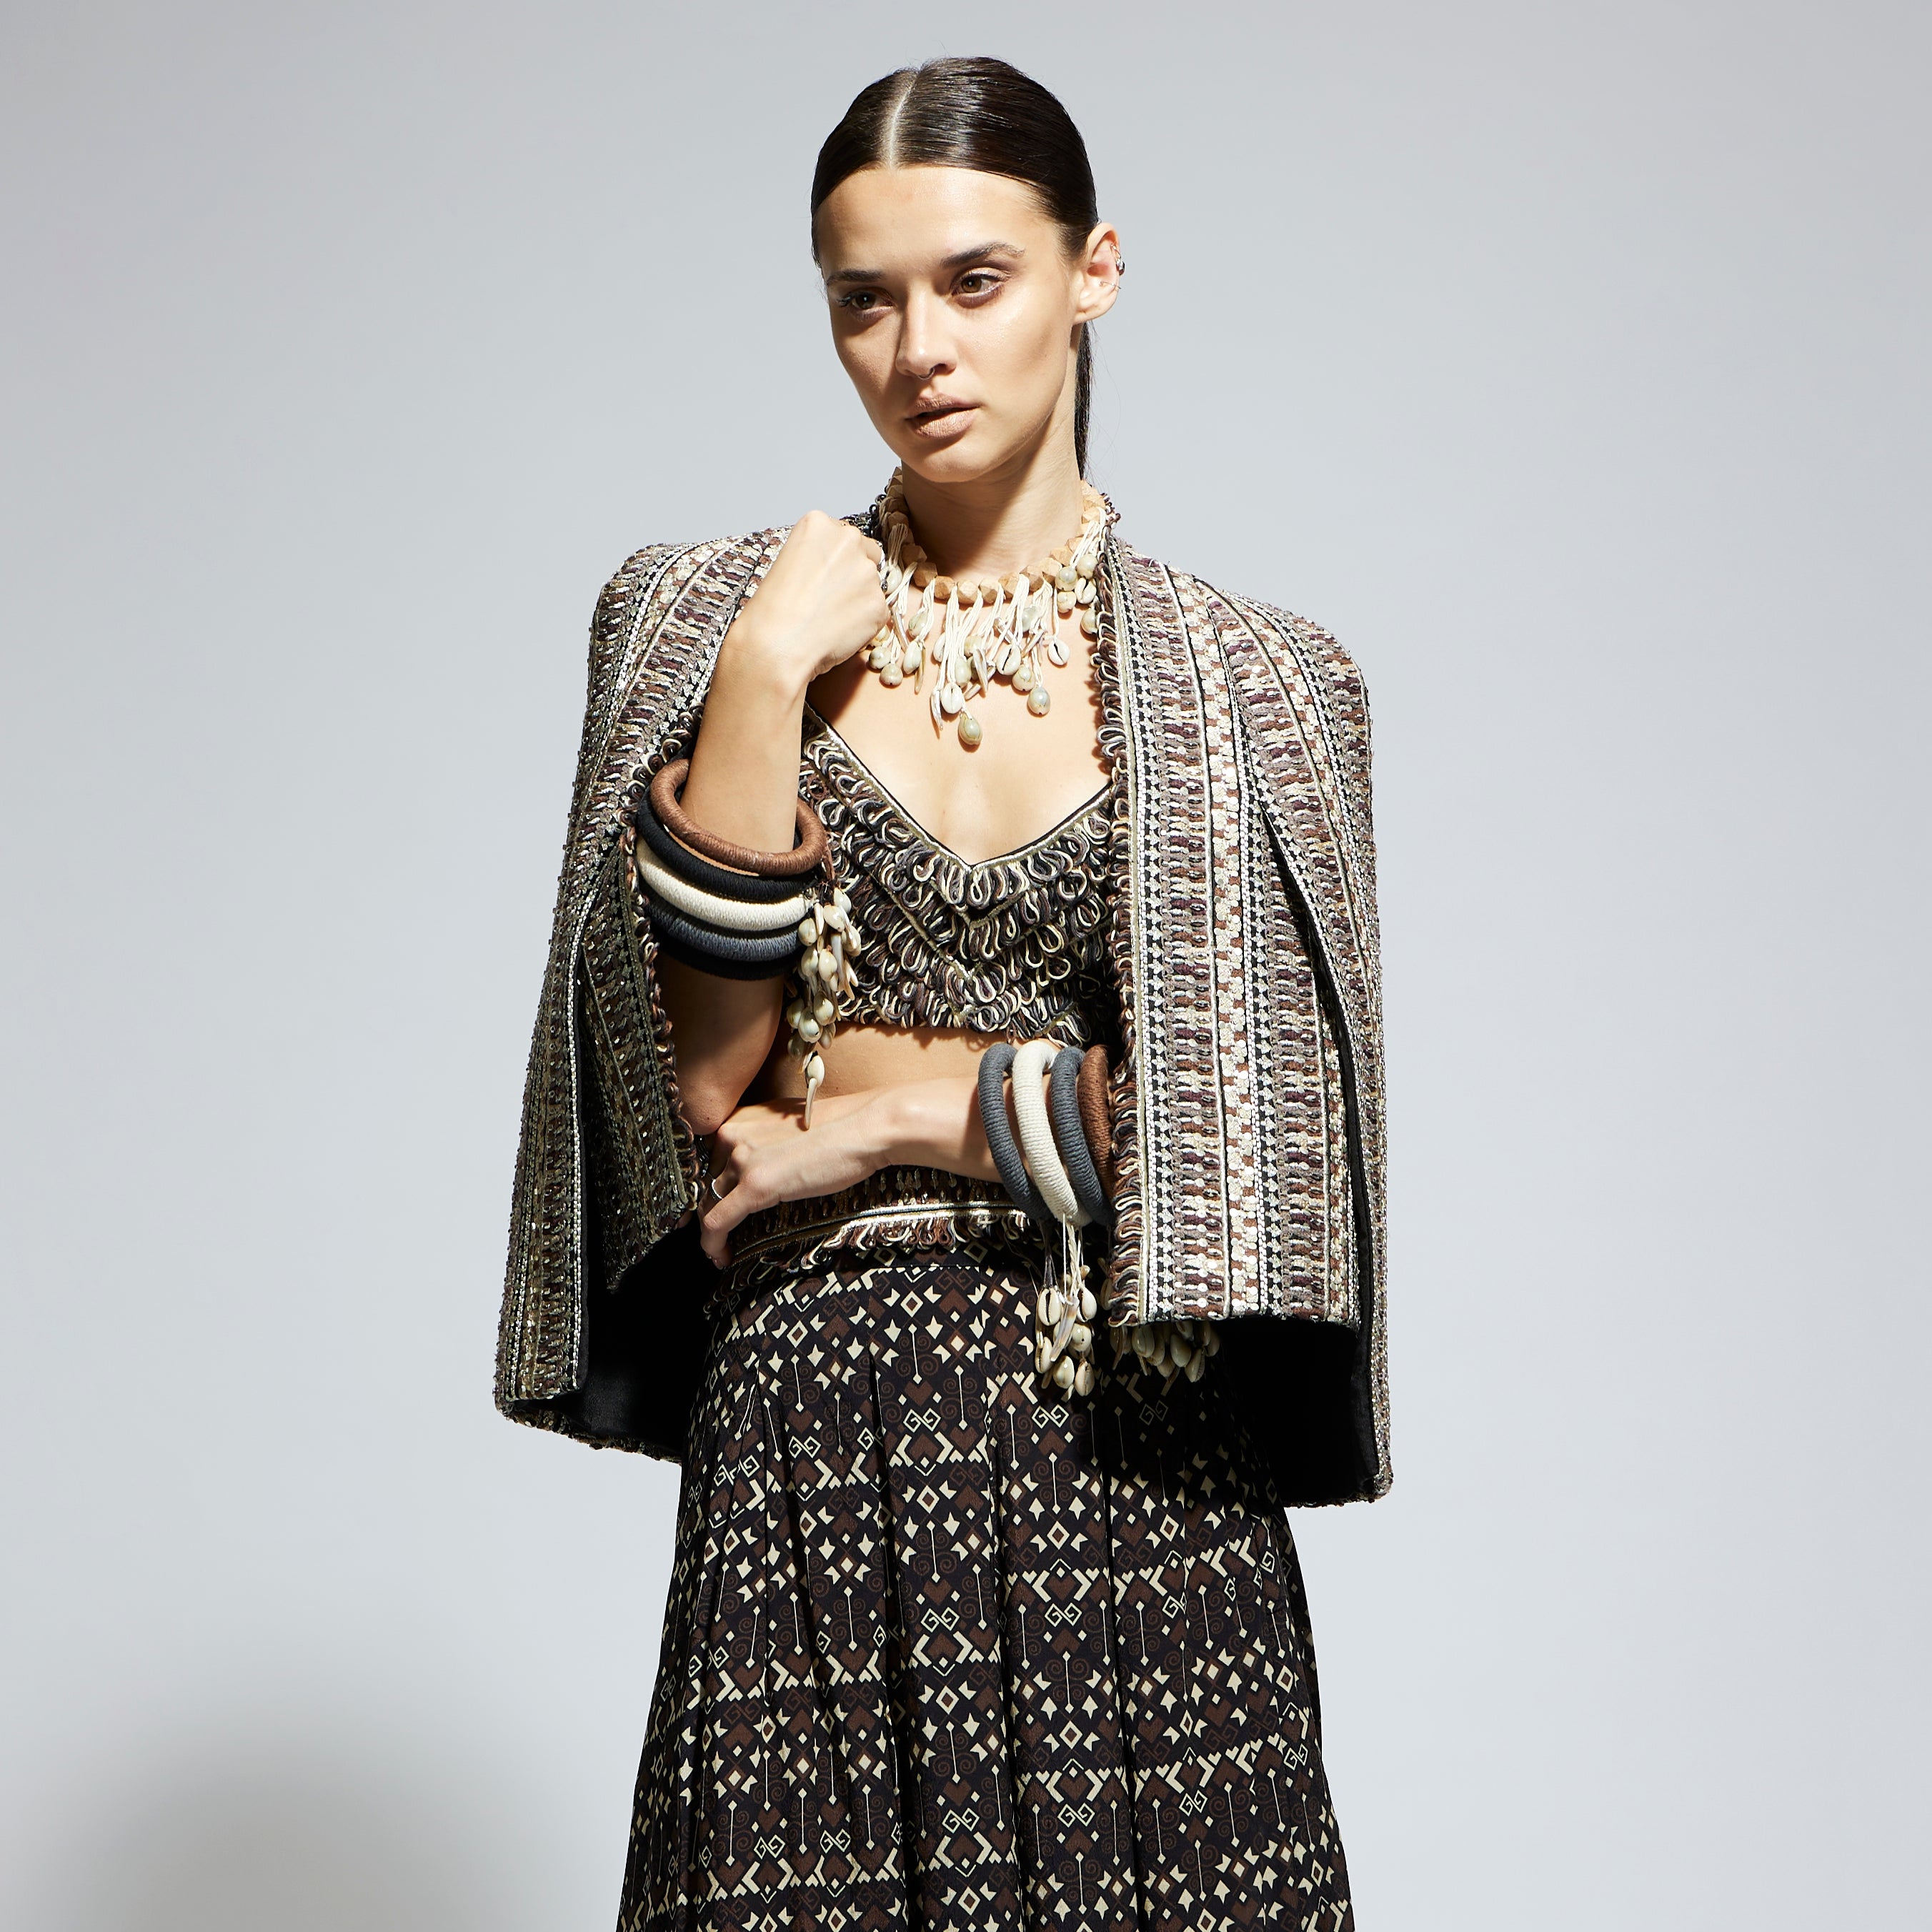 BROWN THREADWORK CAPE JACKET PAIRED WITH TEXTURED BUSTIER AND FLARED PANTS